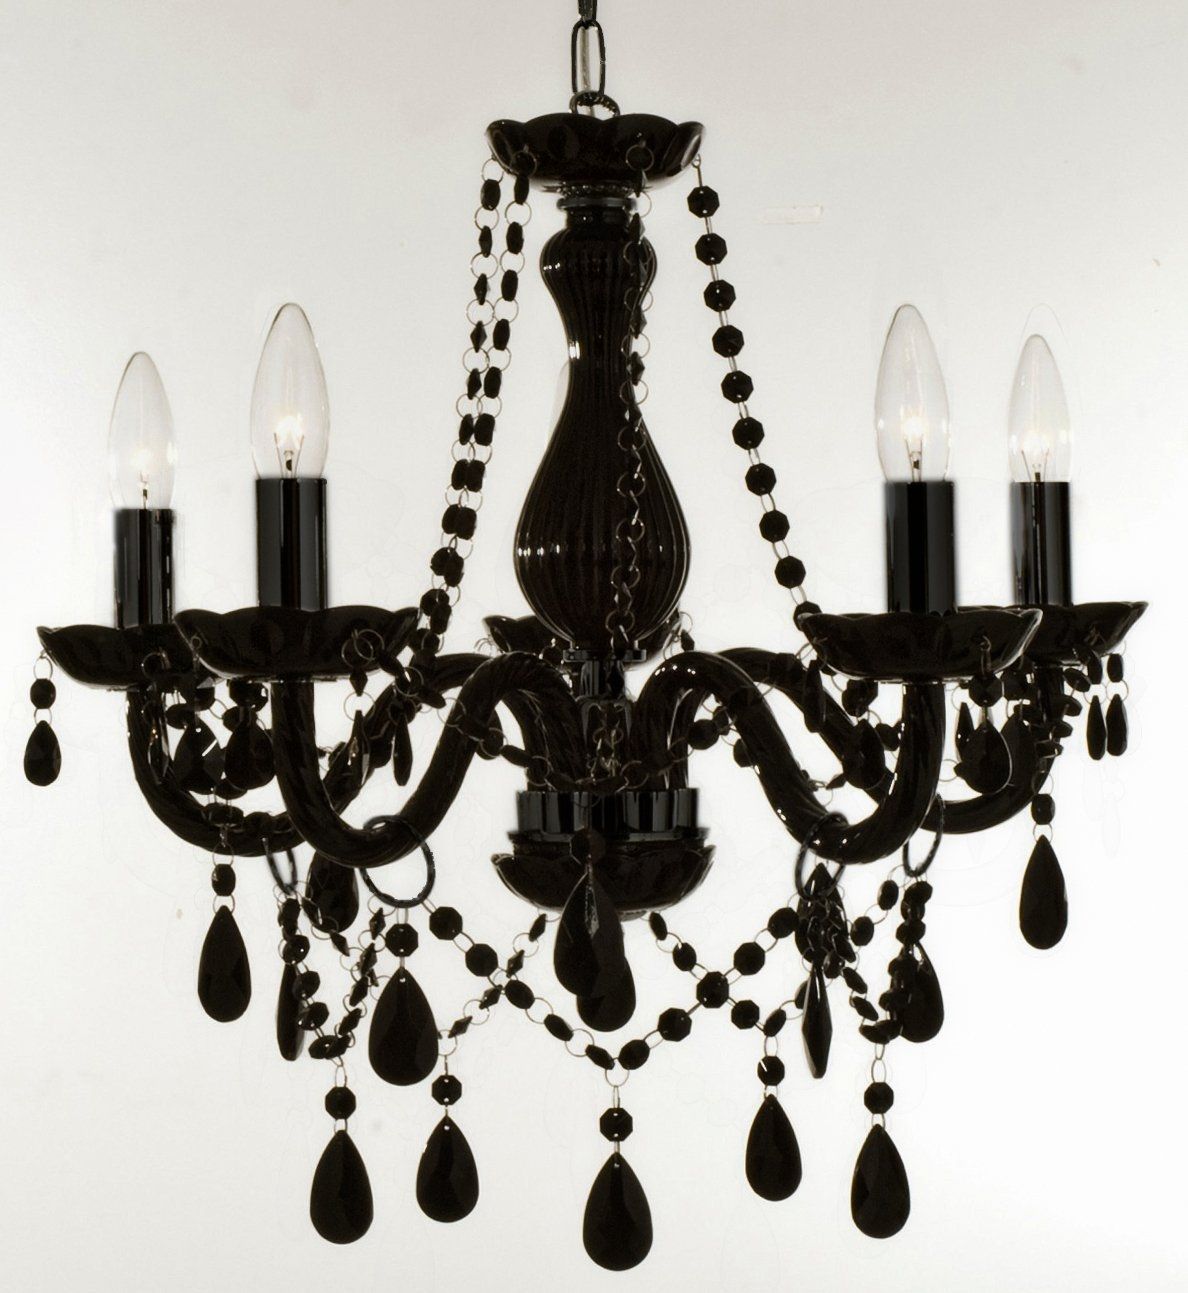 Chandelier Glamorous Black And Crystal Chandeliers Wrought Iron Regarding Black Chandelier (View 6 of 12)